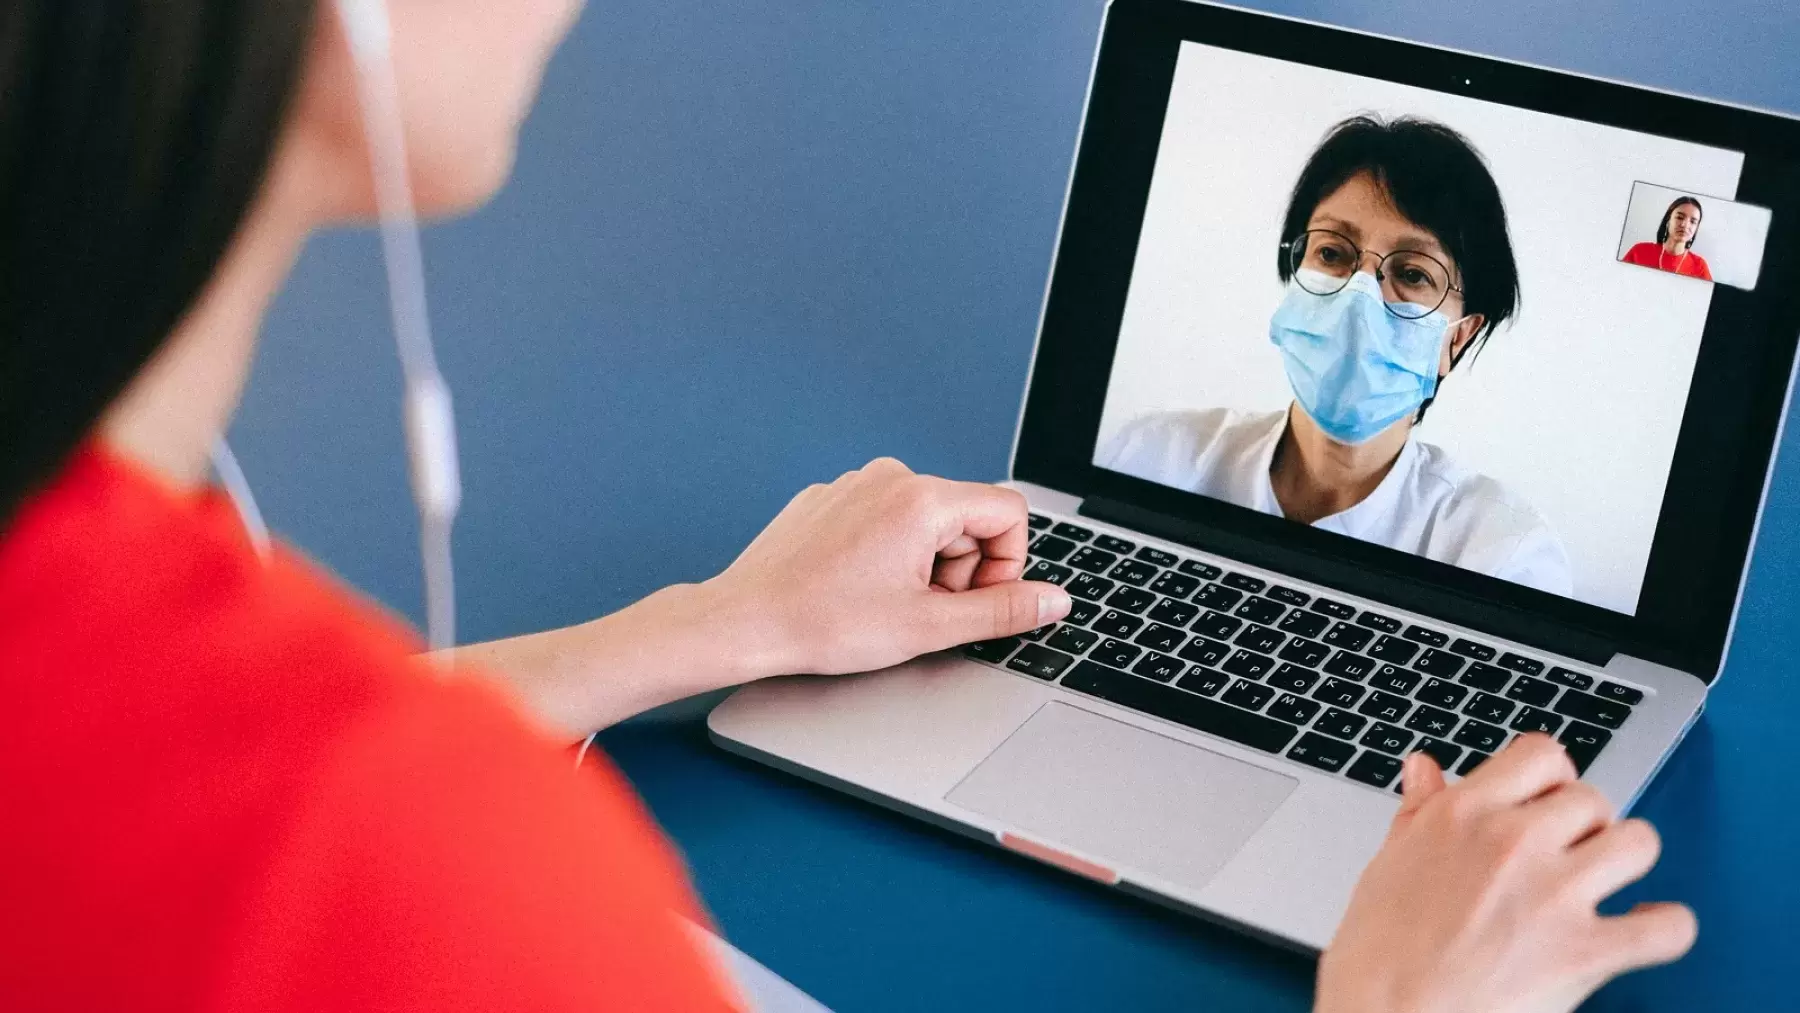 Person talking on a video call with a healthcare worker in a mask.